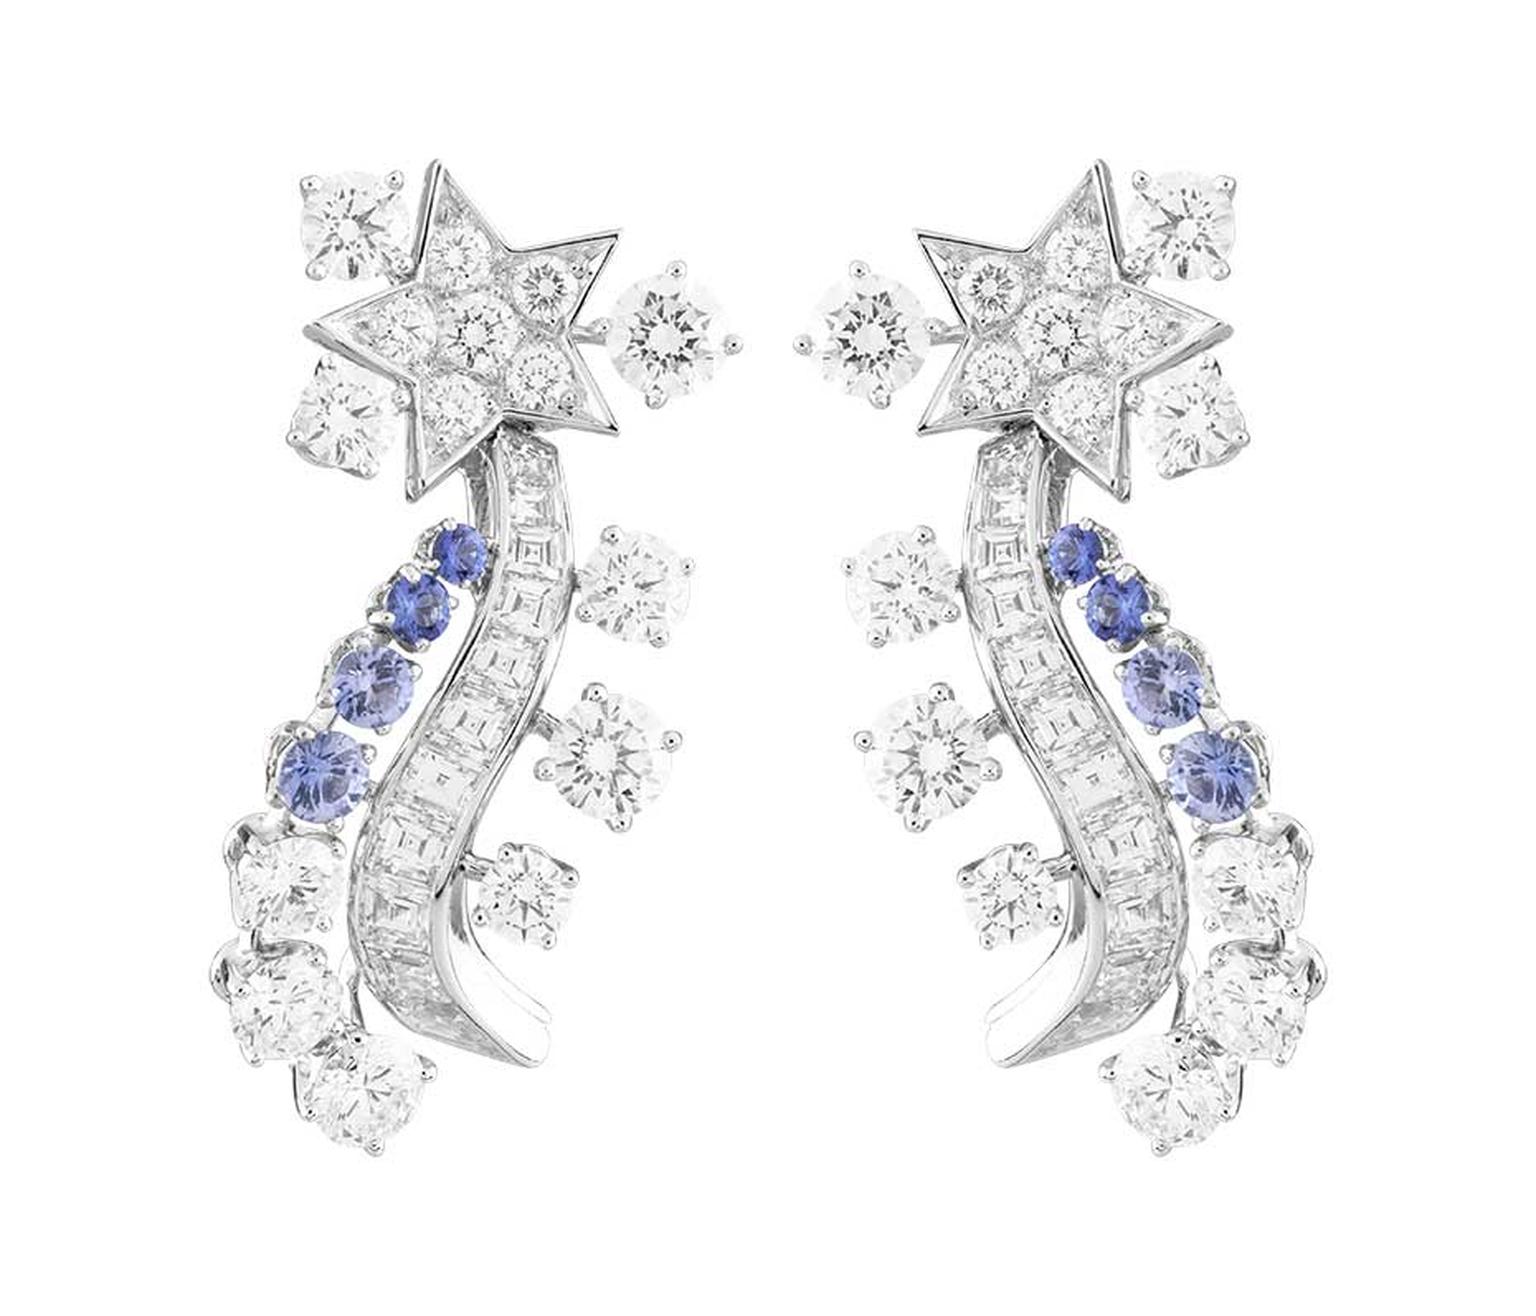 Worn by Kirsten Dunst to the 2014 Met Ball, the Van Cleef & Arpels Serenitatis earrings from the 'Voyages Extraordinaires' collection featuring diamonds and sapphires.